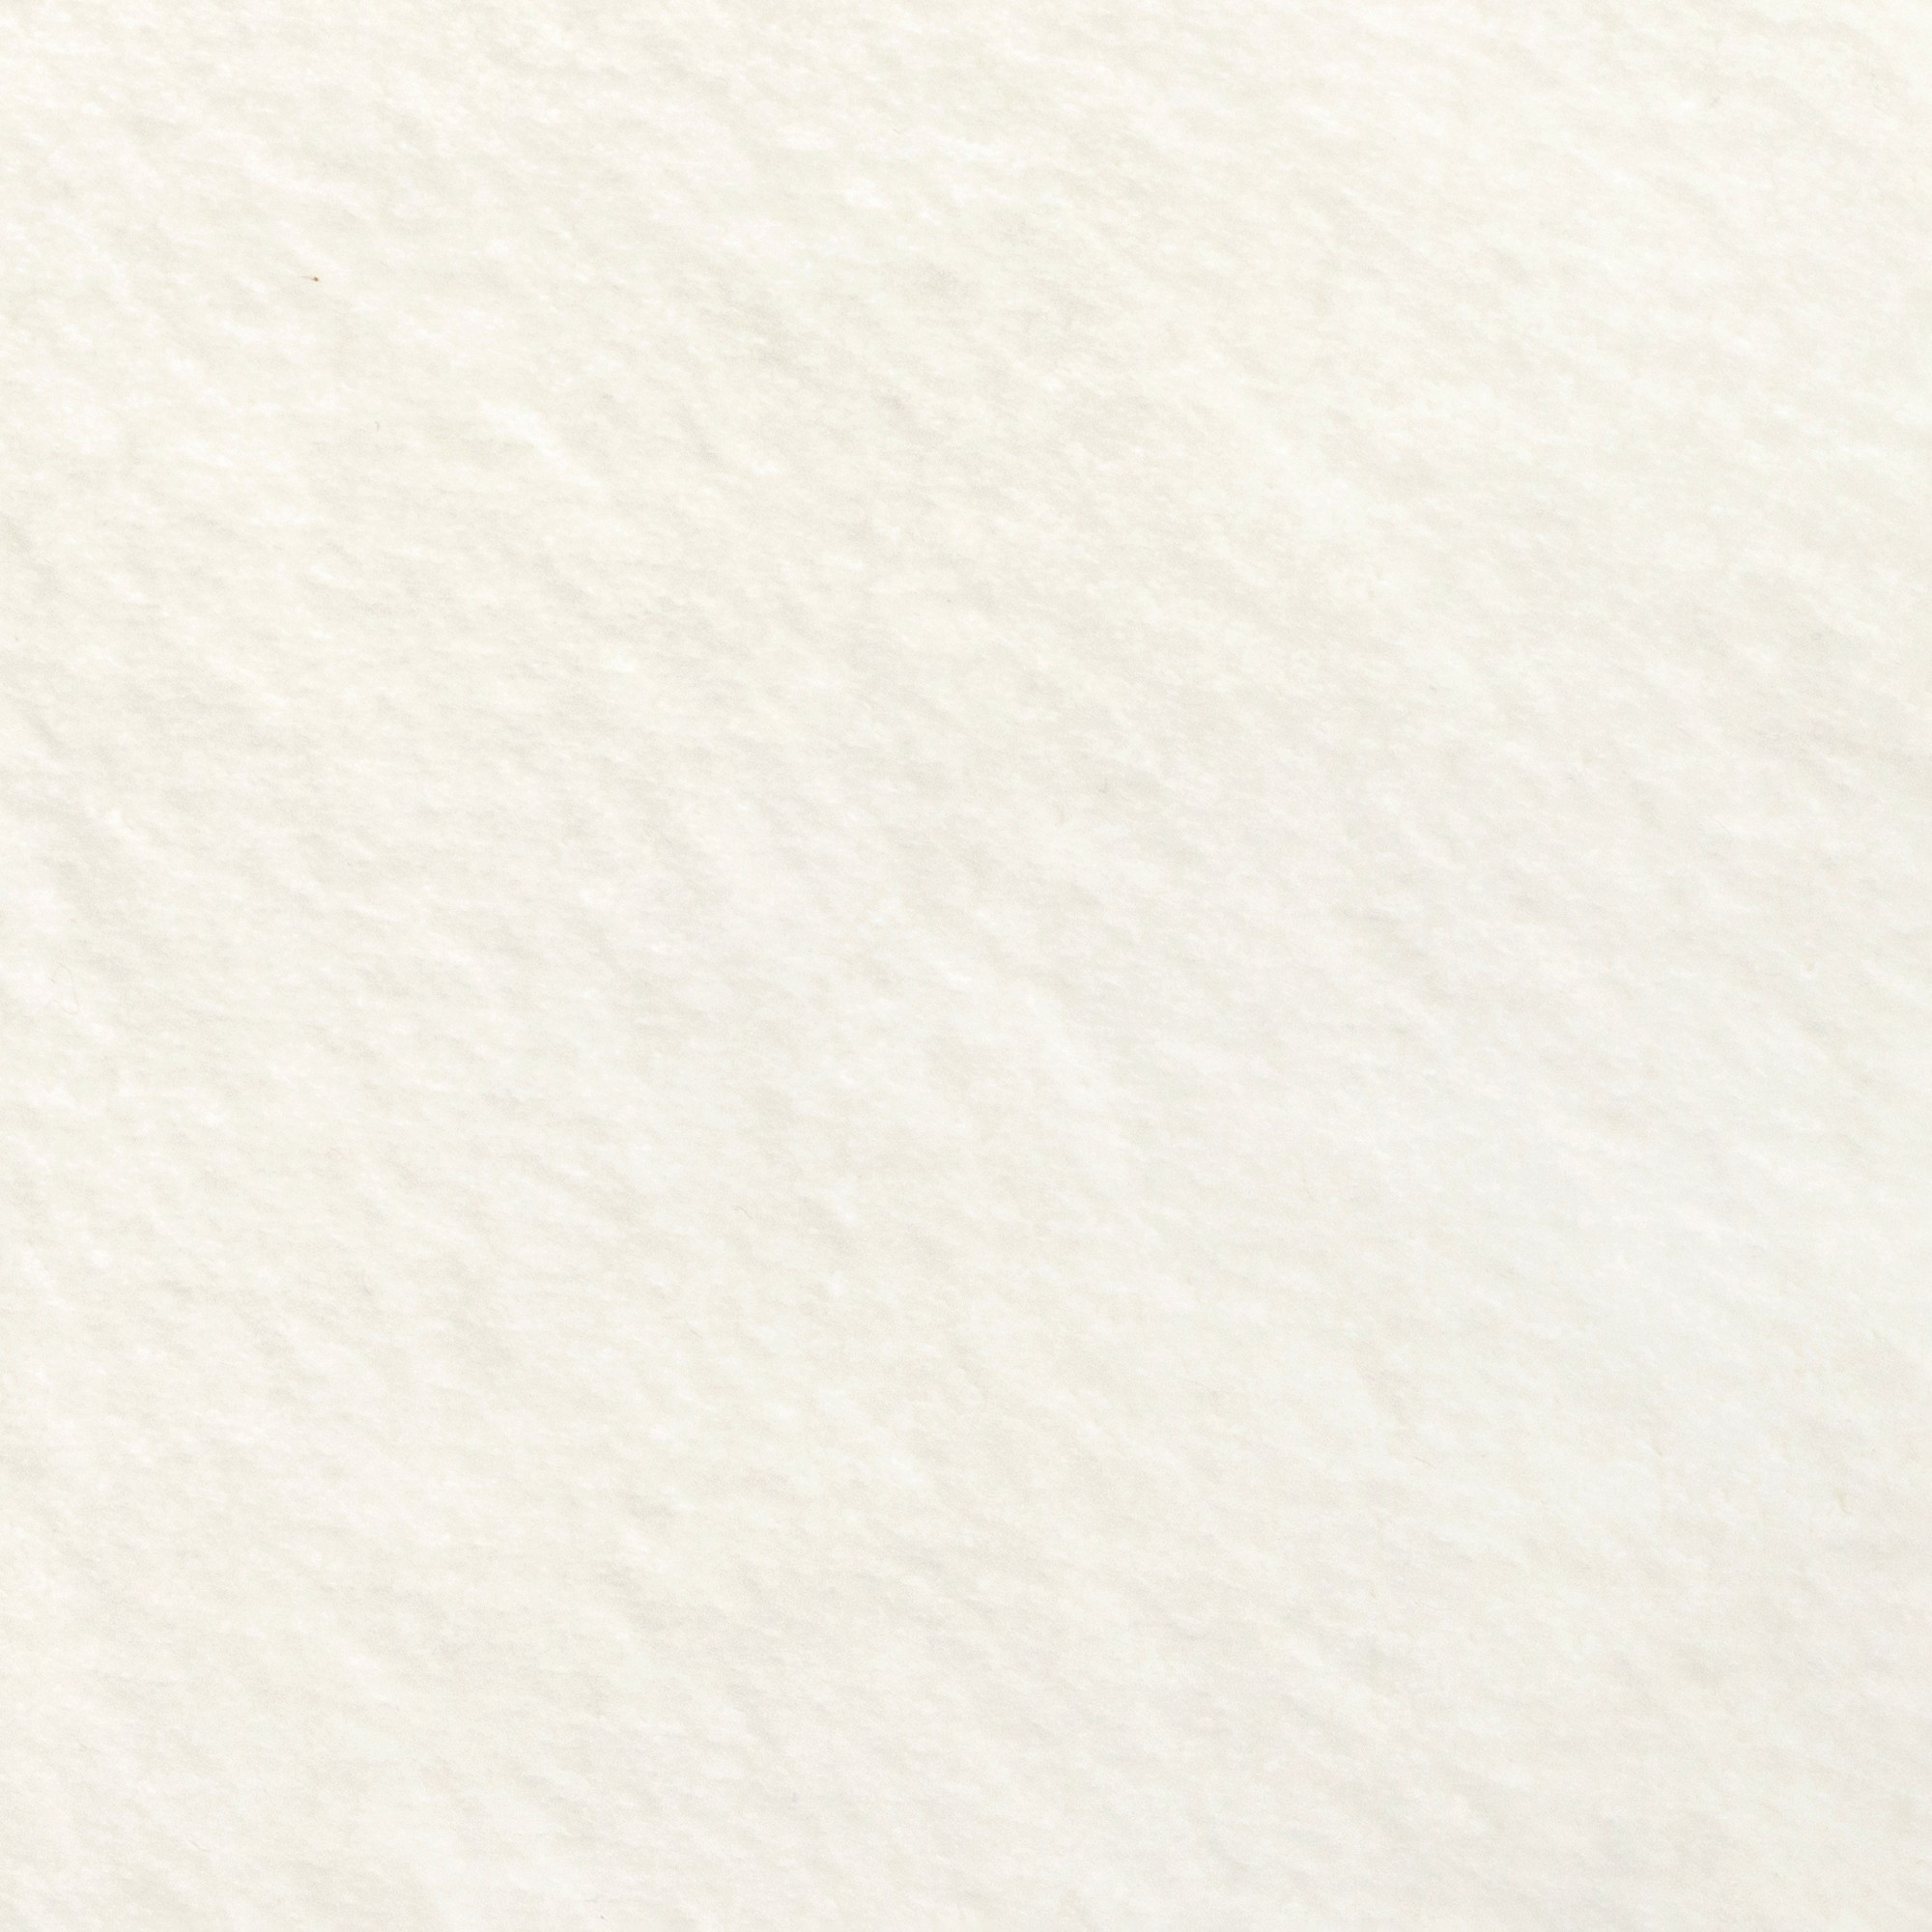 a white sheet of paper with a white border